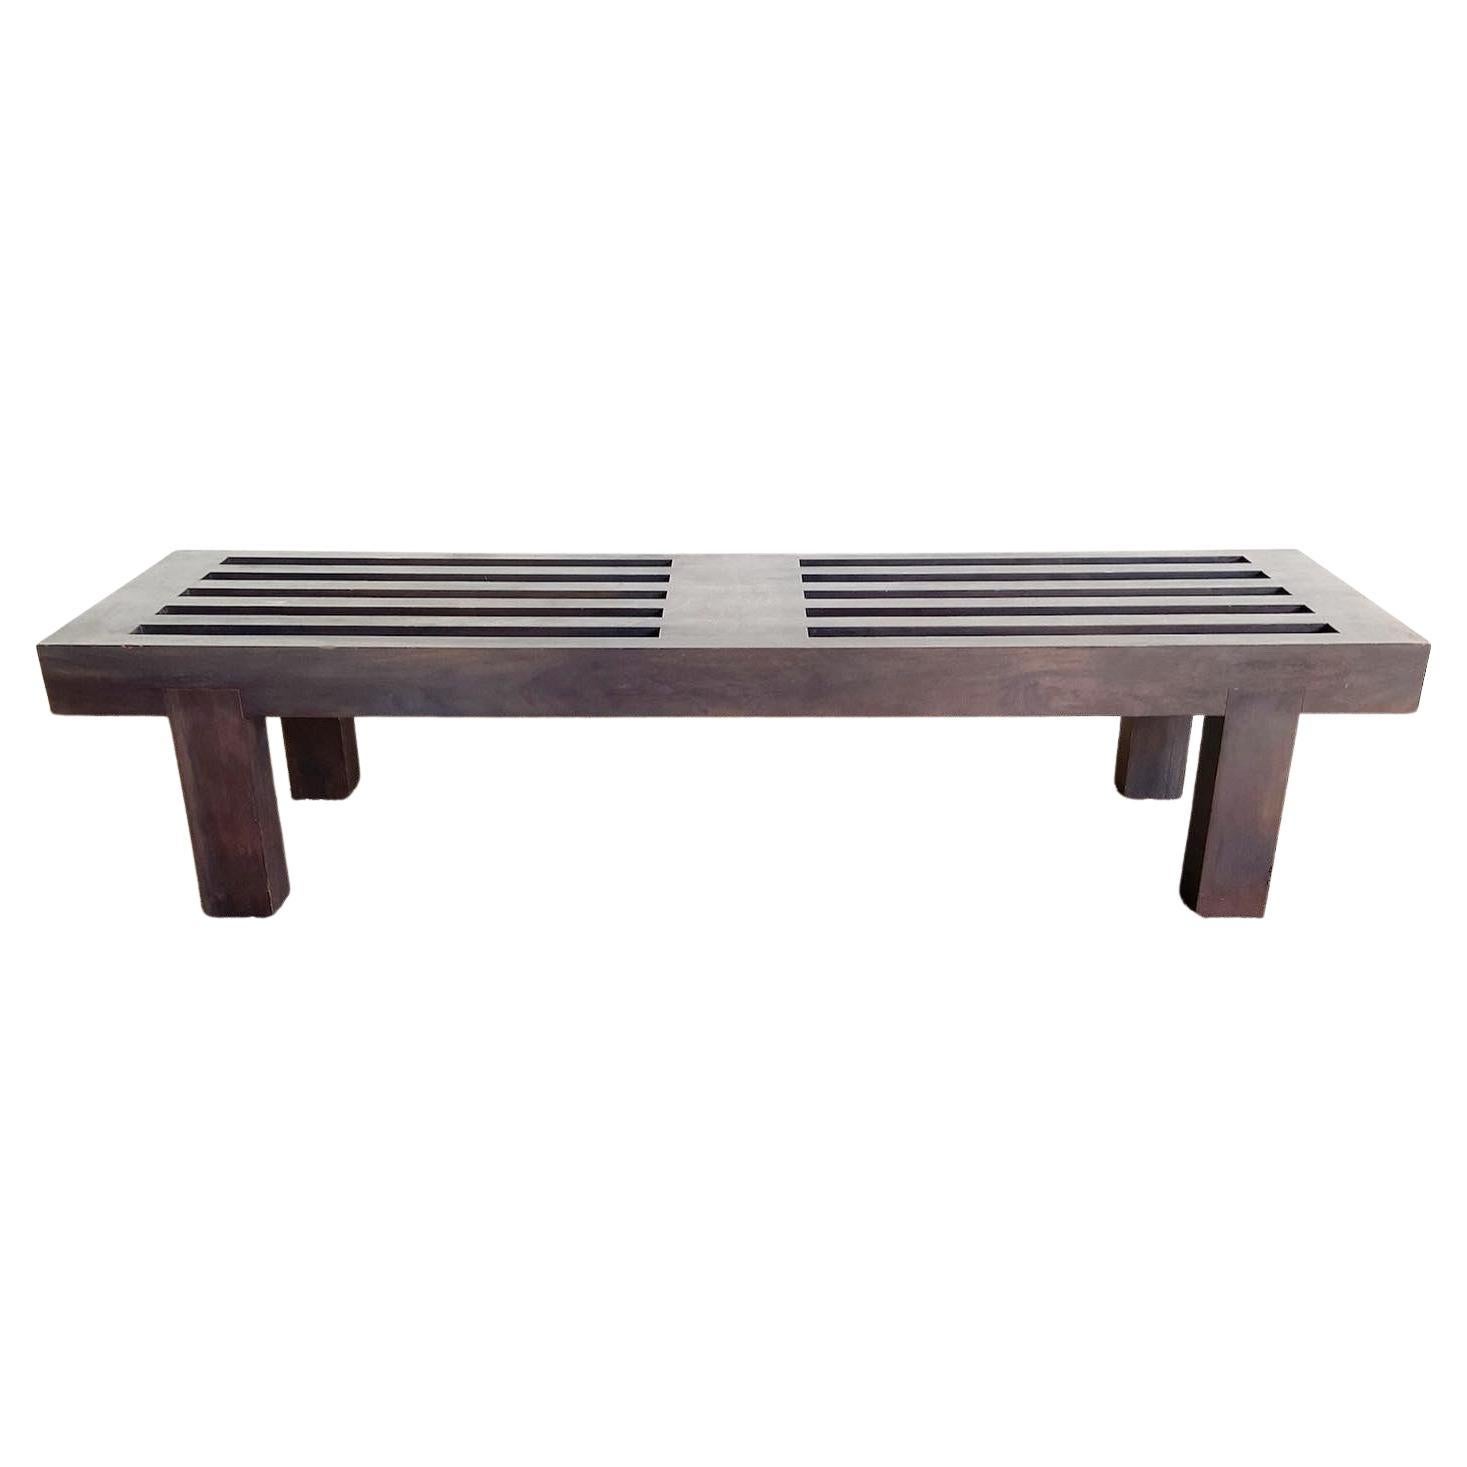 Contemporary Black Wooden Slatted Bench